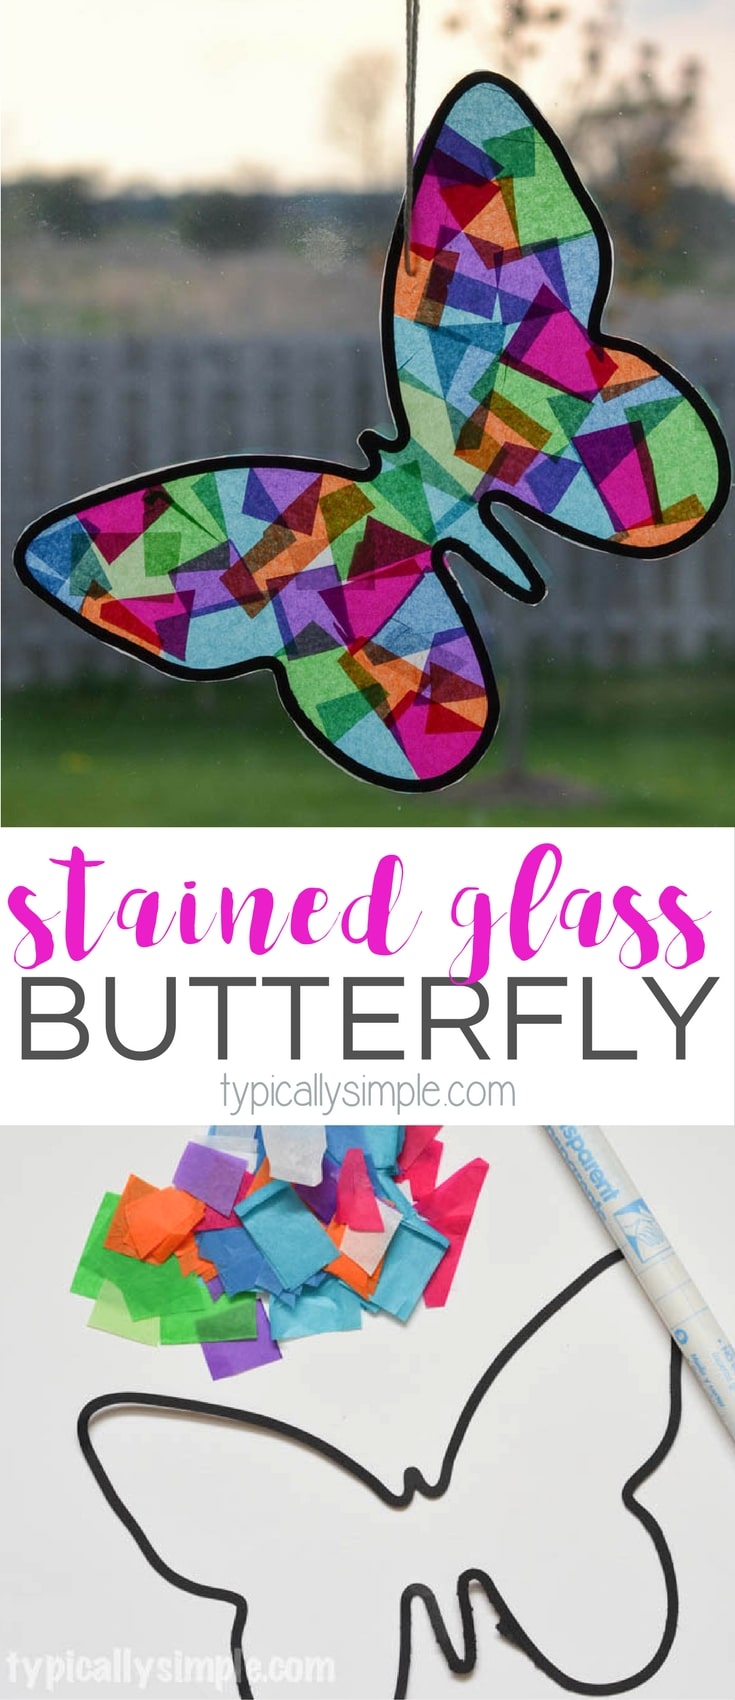 A fun spring craft to make with the kids! Using tissue paper and black construction paper, this butterfly looks like it's made from stained glass.